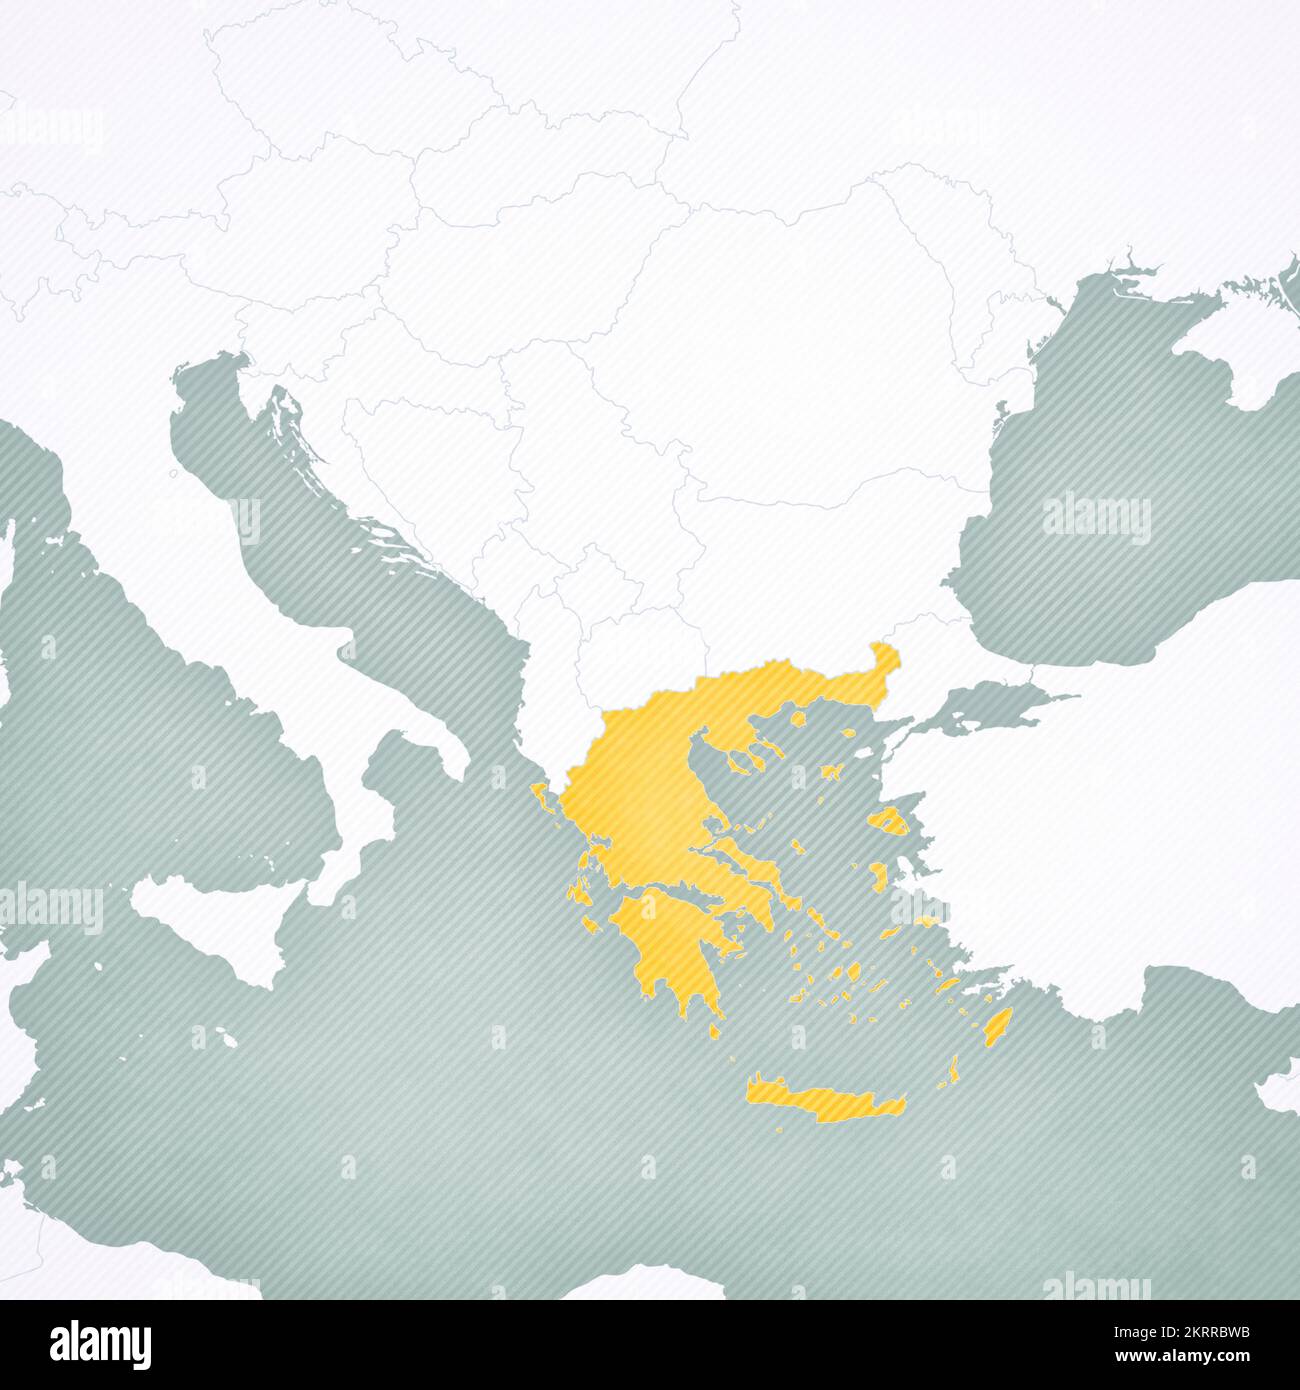 Greece on the map of Balkans with softly striped vintage background. Stock Photo